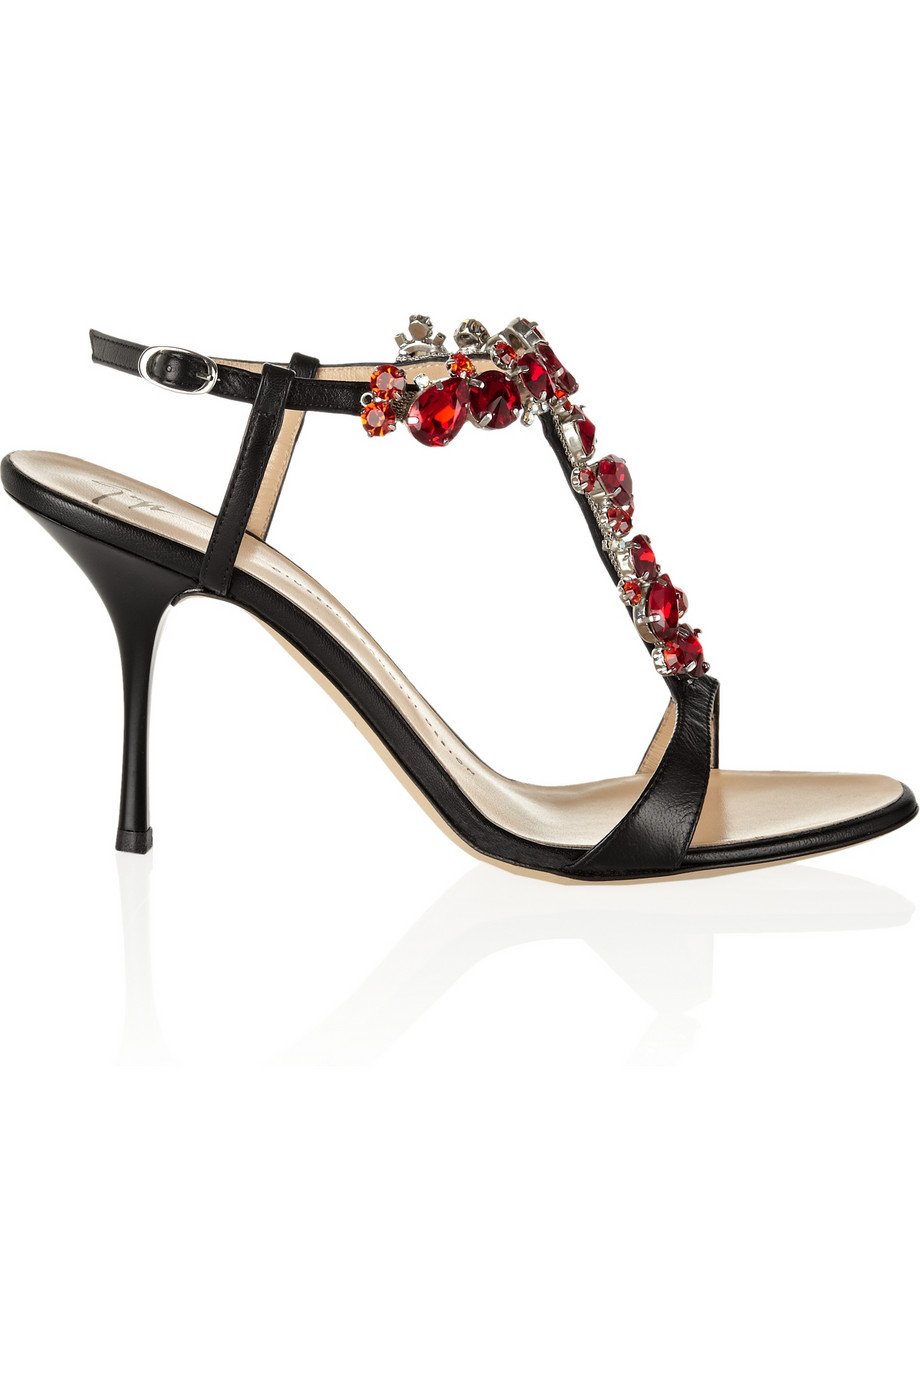 Giuseppe zanotti Crystal-Embellished Leather Sandals in Black | Lyst